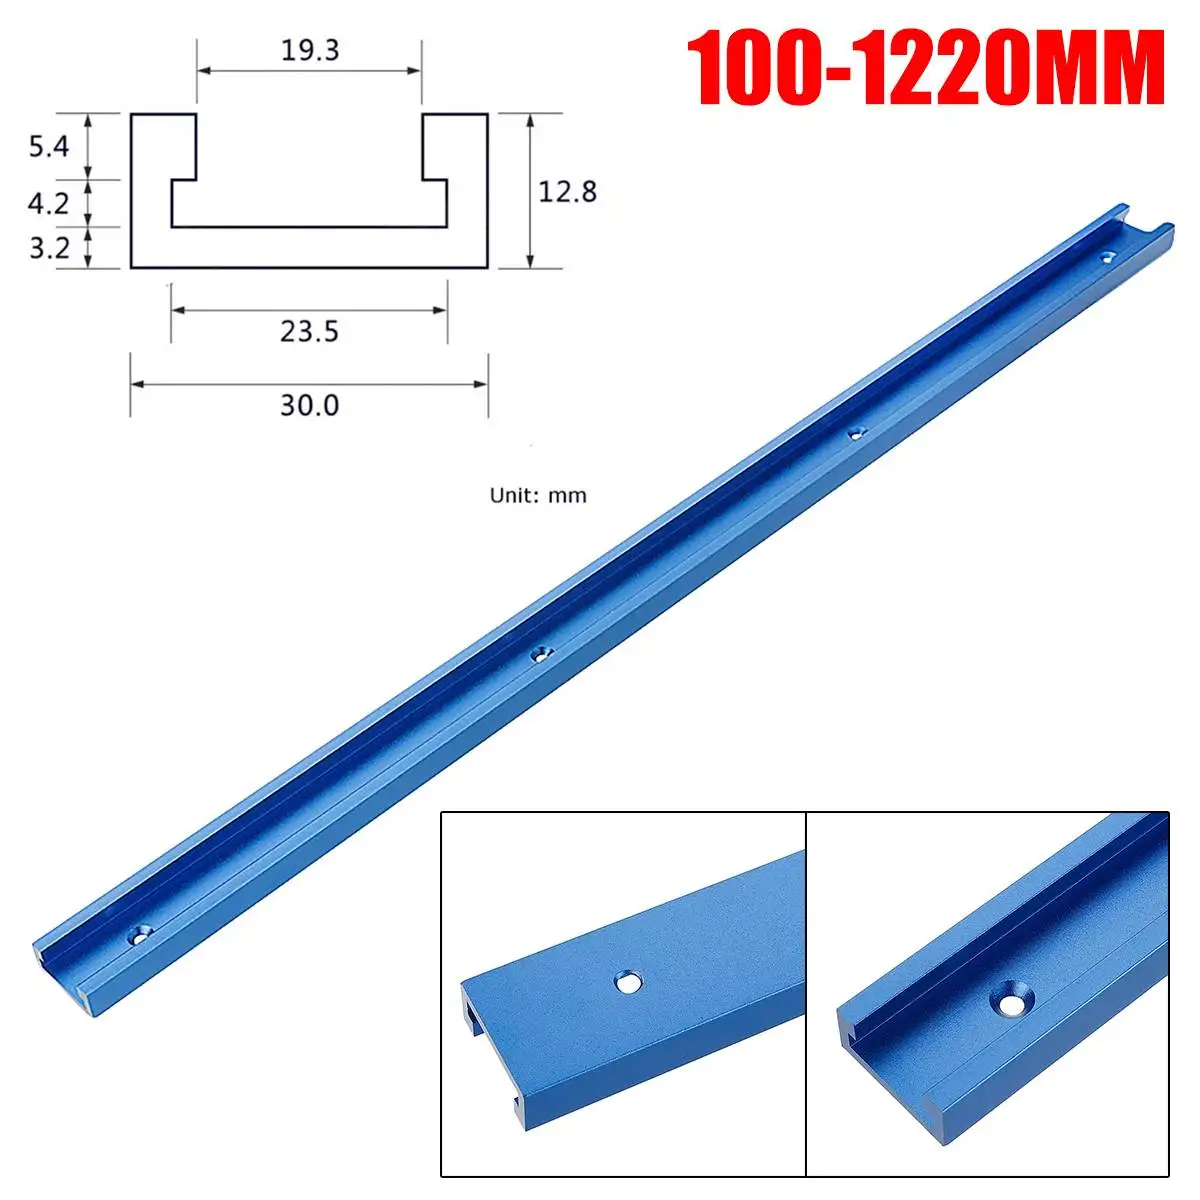 

400-1220mm T Screw Fixture Slot Aluminium Woodworking T-slot Miter Track Jig Miter Track Stop for Router Table Bandsaws DIY Tool